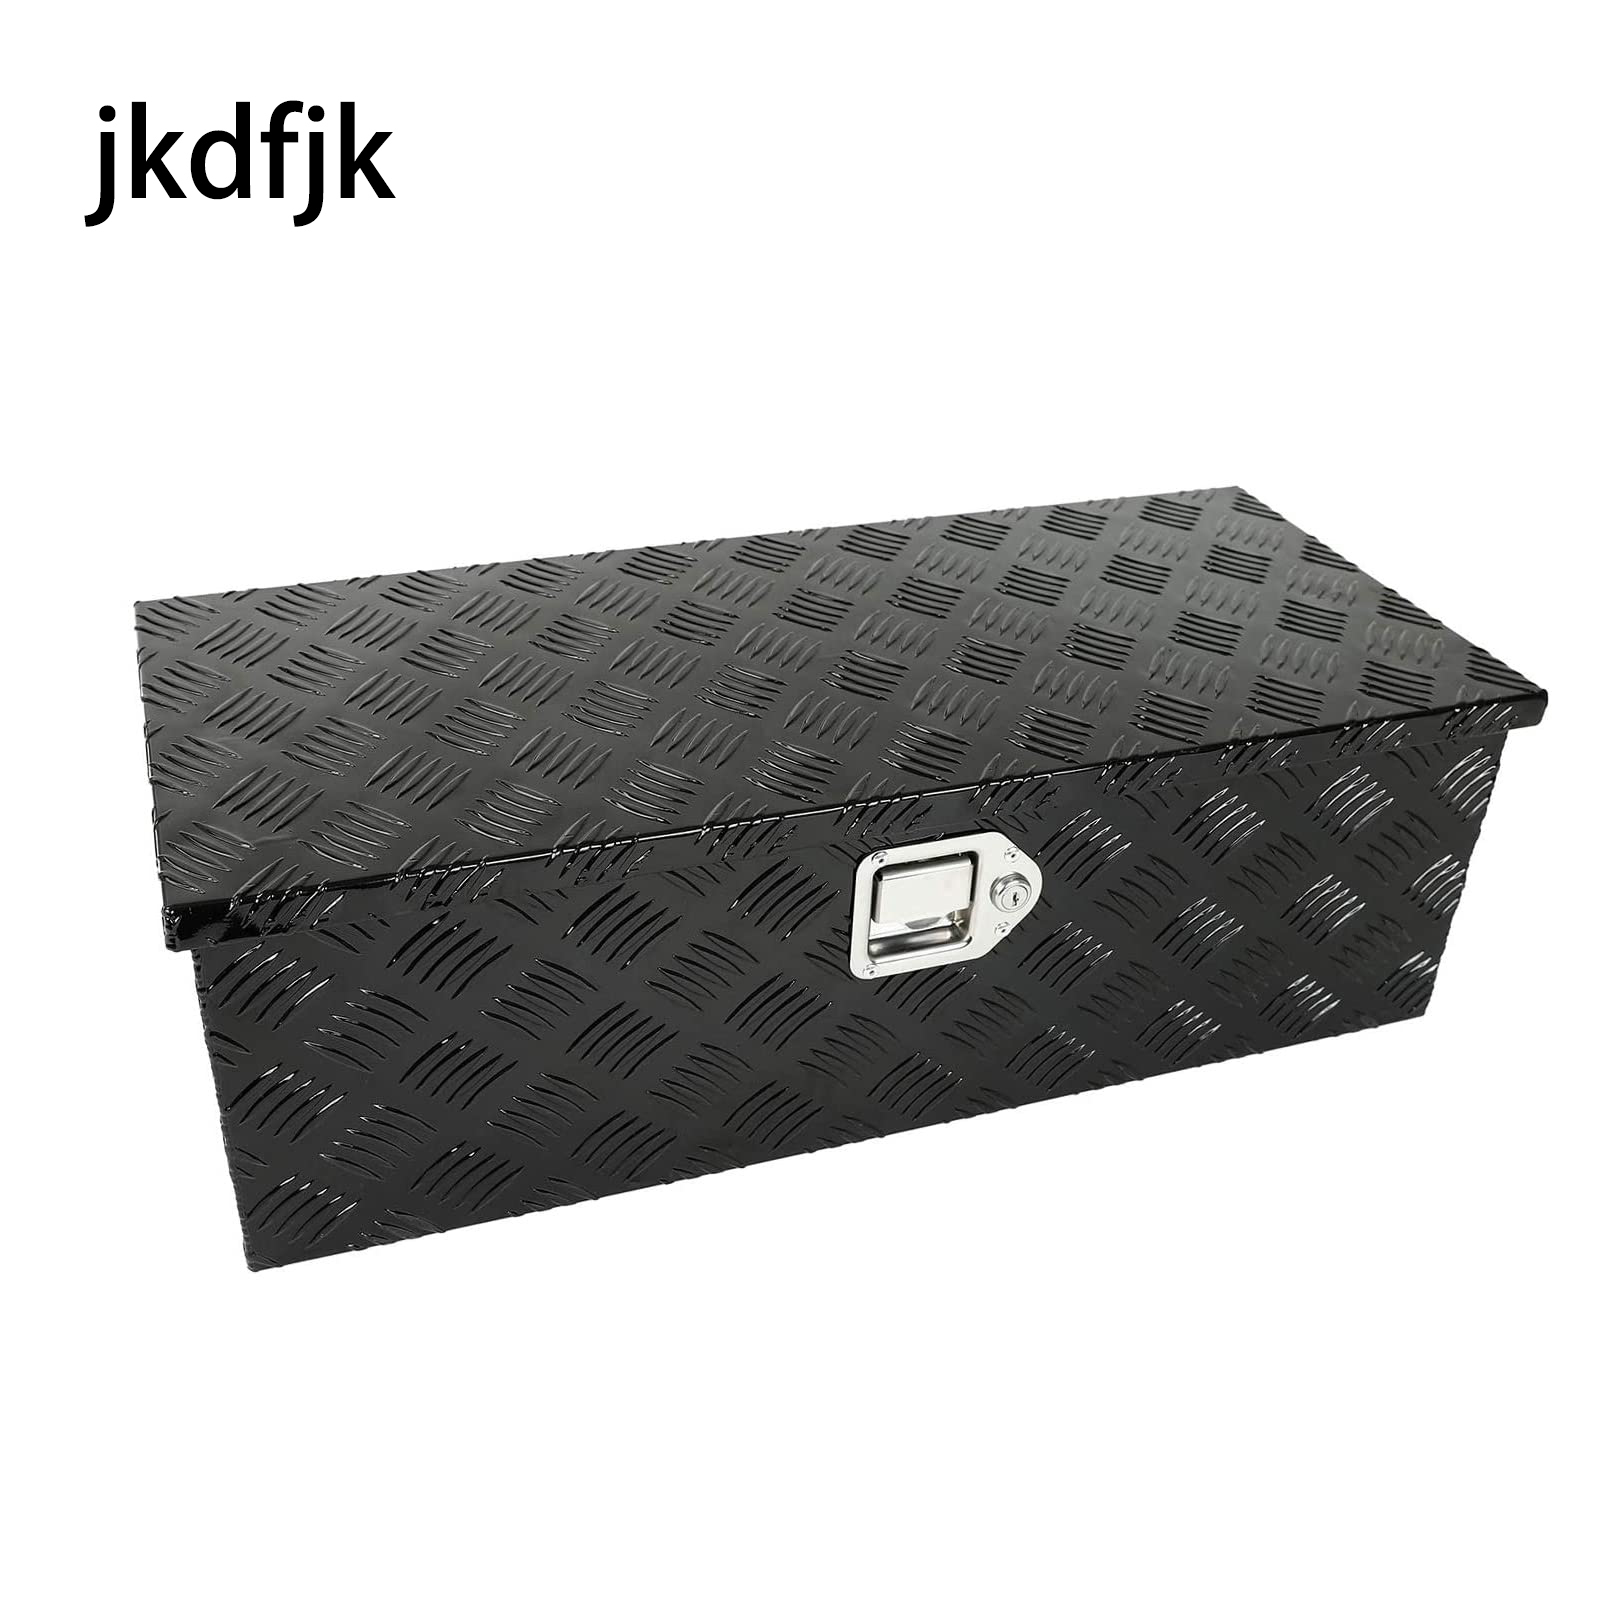 jkdfjk 30 x 13 x 10 Inches Pick Up Truck Bed Metal Tool Boxes Trailer Storage